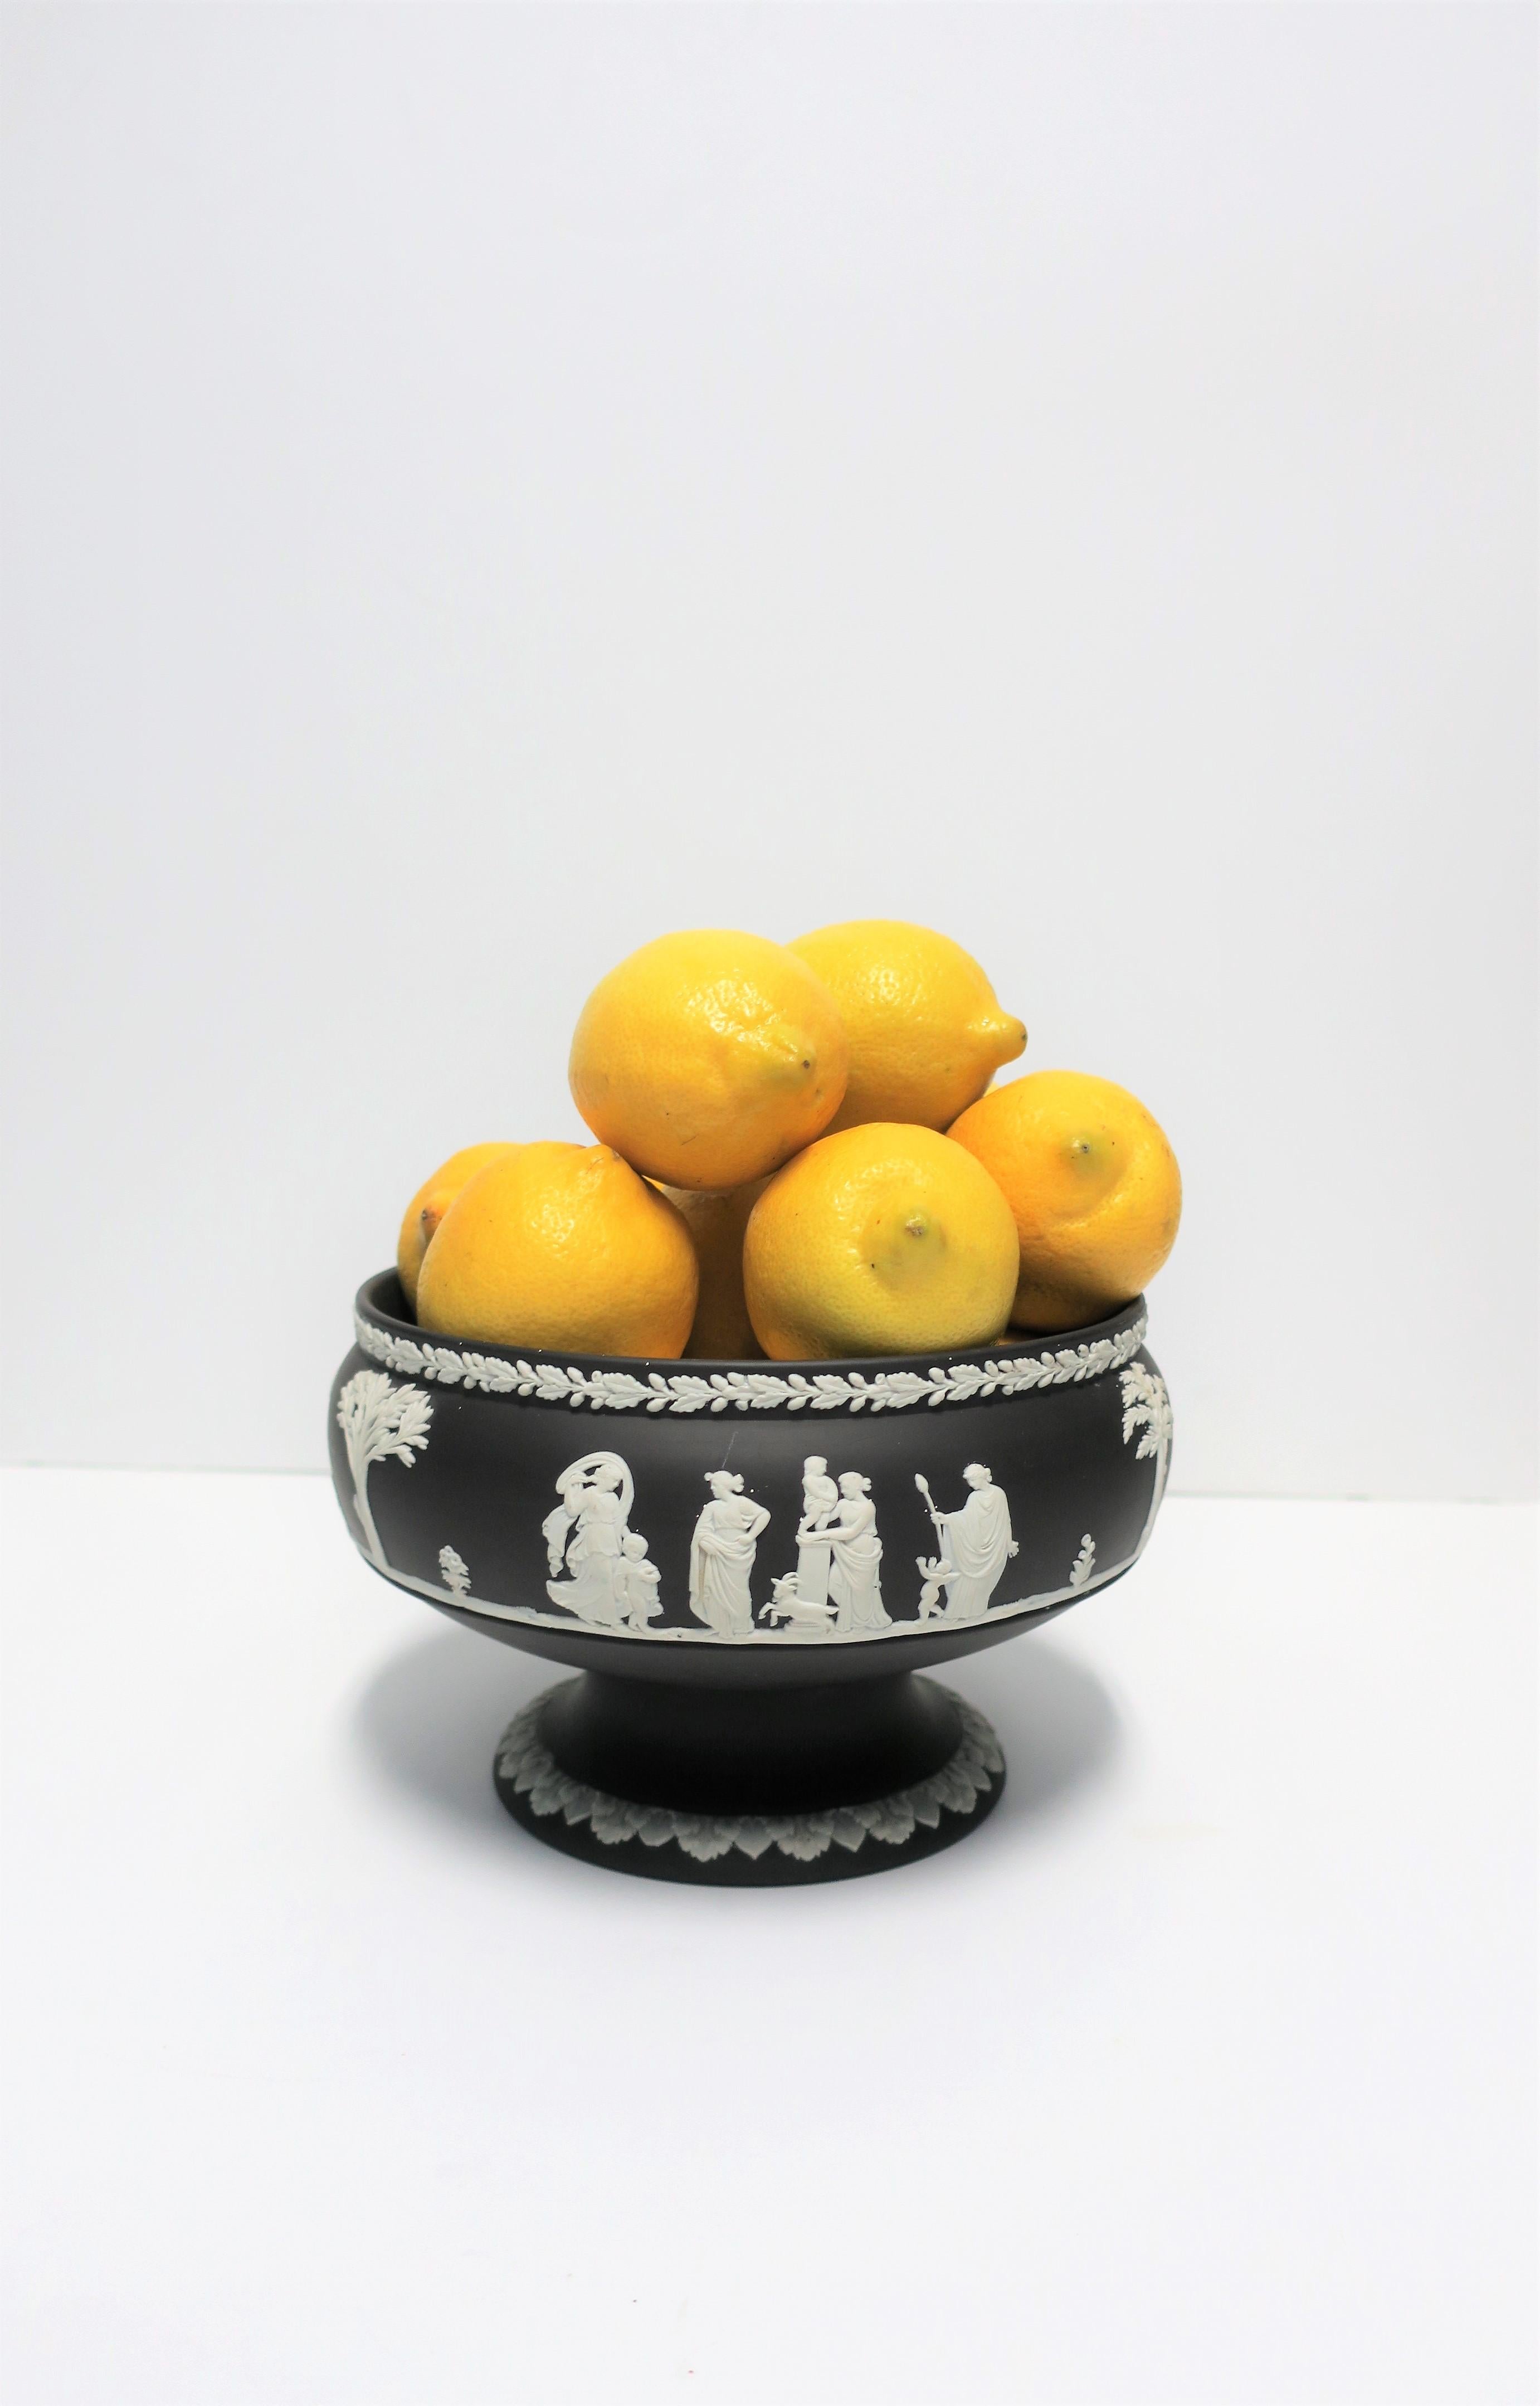 A beautiful detailed black and white Wedgwood Jasperware Neoclassical urn or centerpiece bowl vessel. Several raised relief scenes around bowl in white matte stoneware on top of black matte stoneware. With maker's mark underneath as show in images